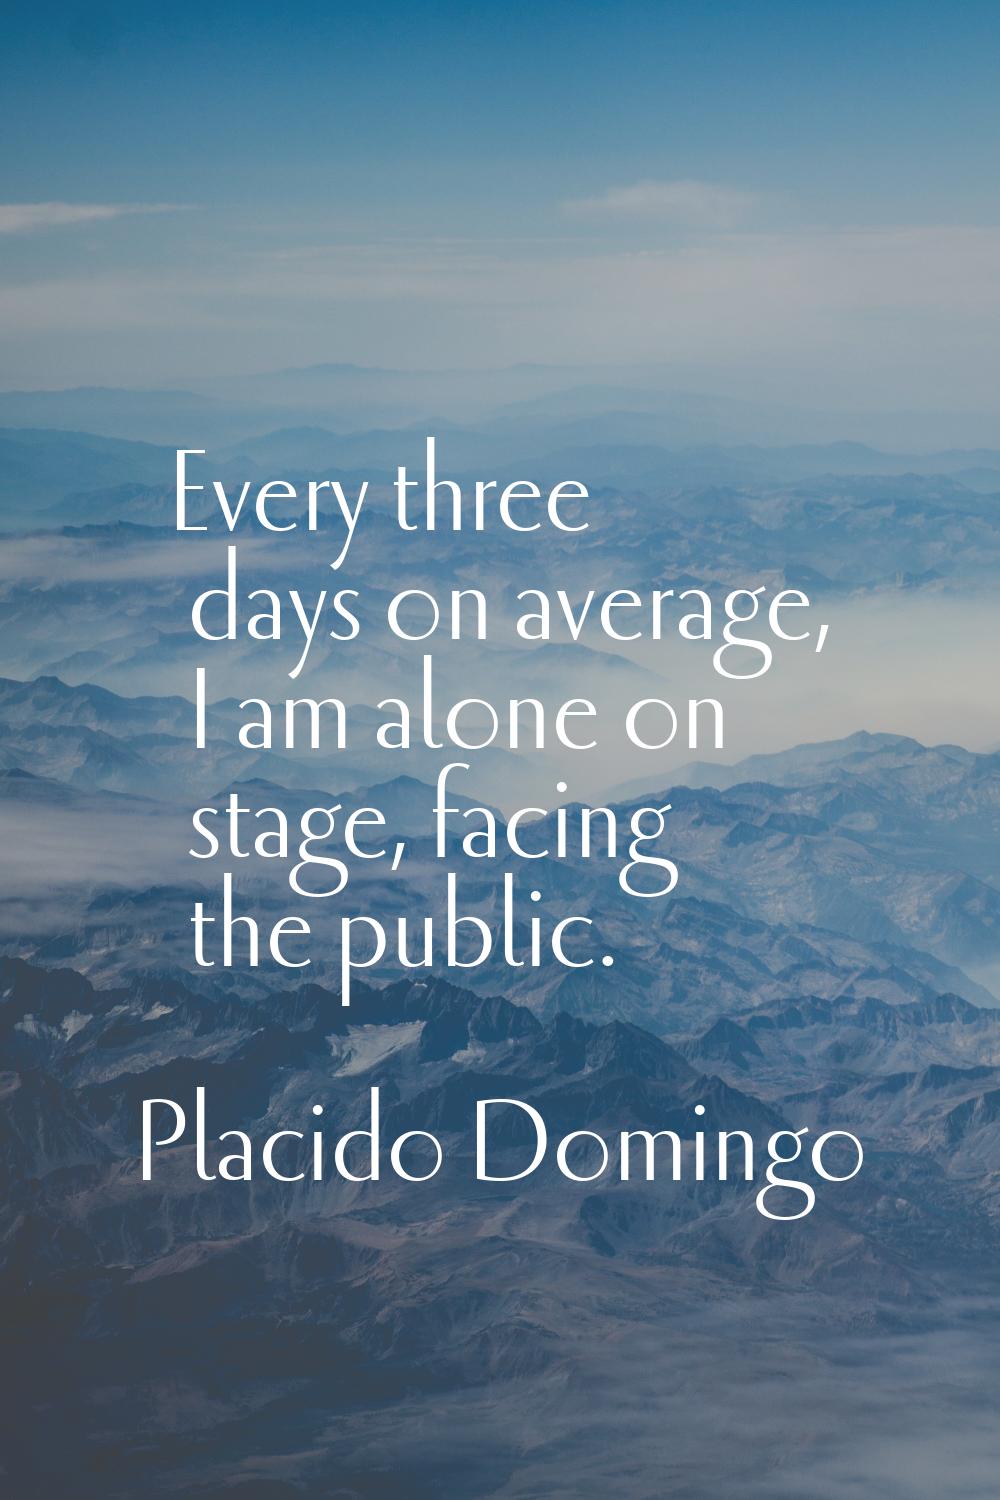 Every three days on average, I am alone on stage, facing the public.